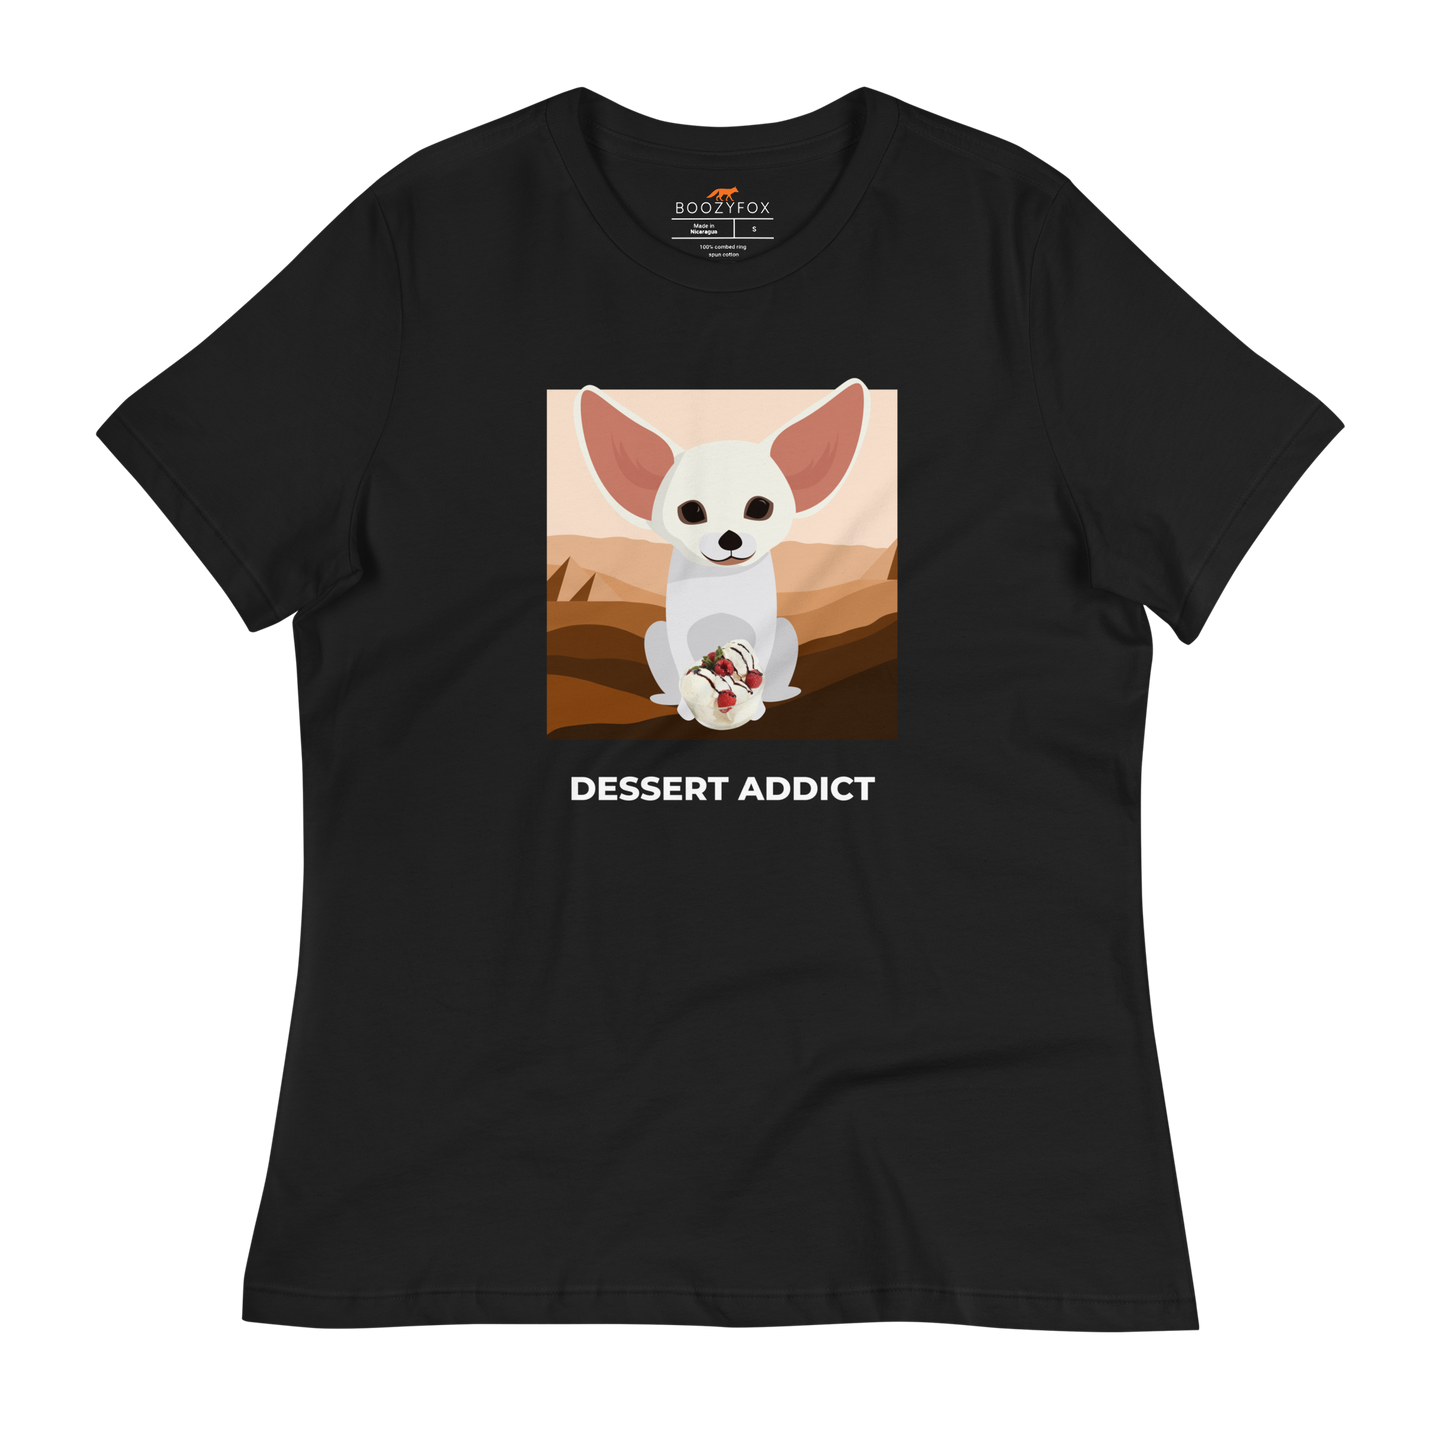 Women's relaxed black Fennec Fox t-shirt featuring a cute Dessert Addict graphic on the chest - Women's Cute Graphic Fennec Fox Tees - Boozy Fox